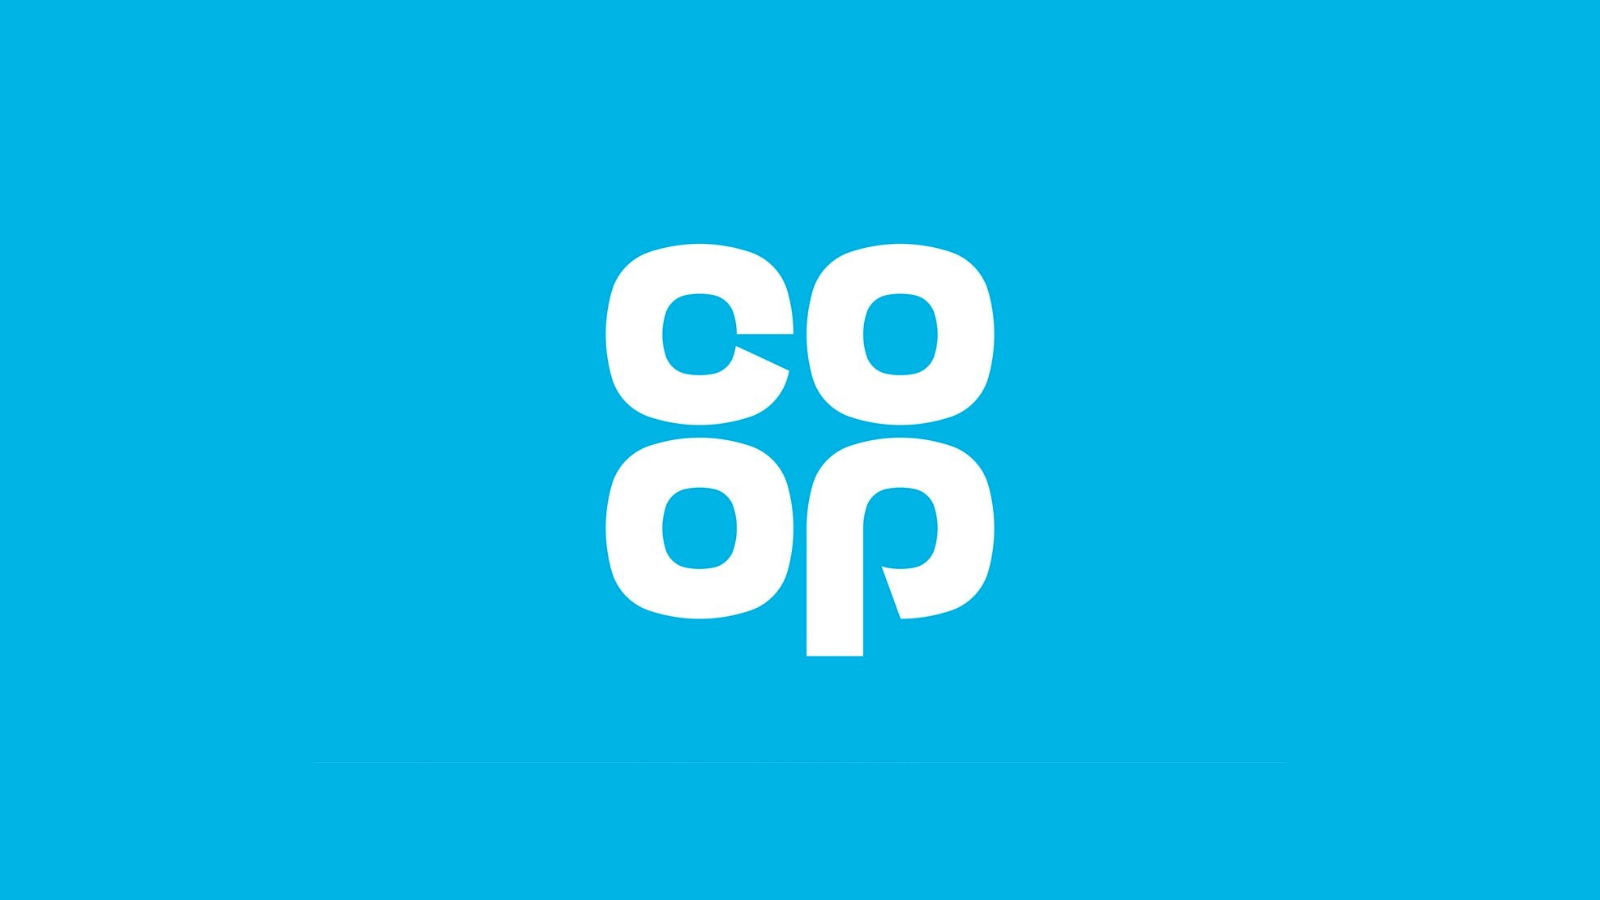 Retail assessments - COOP